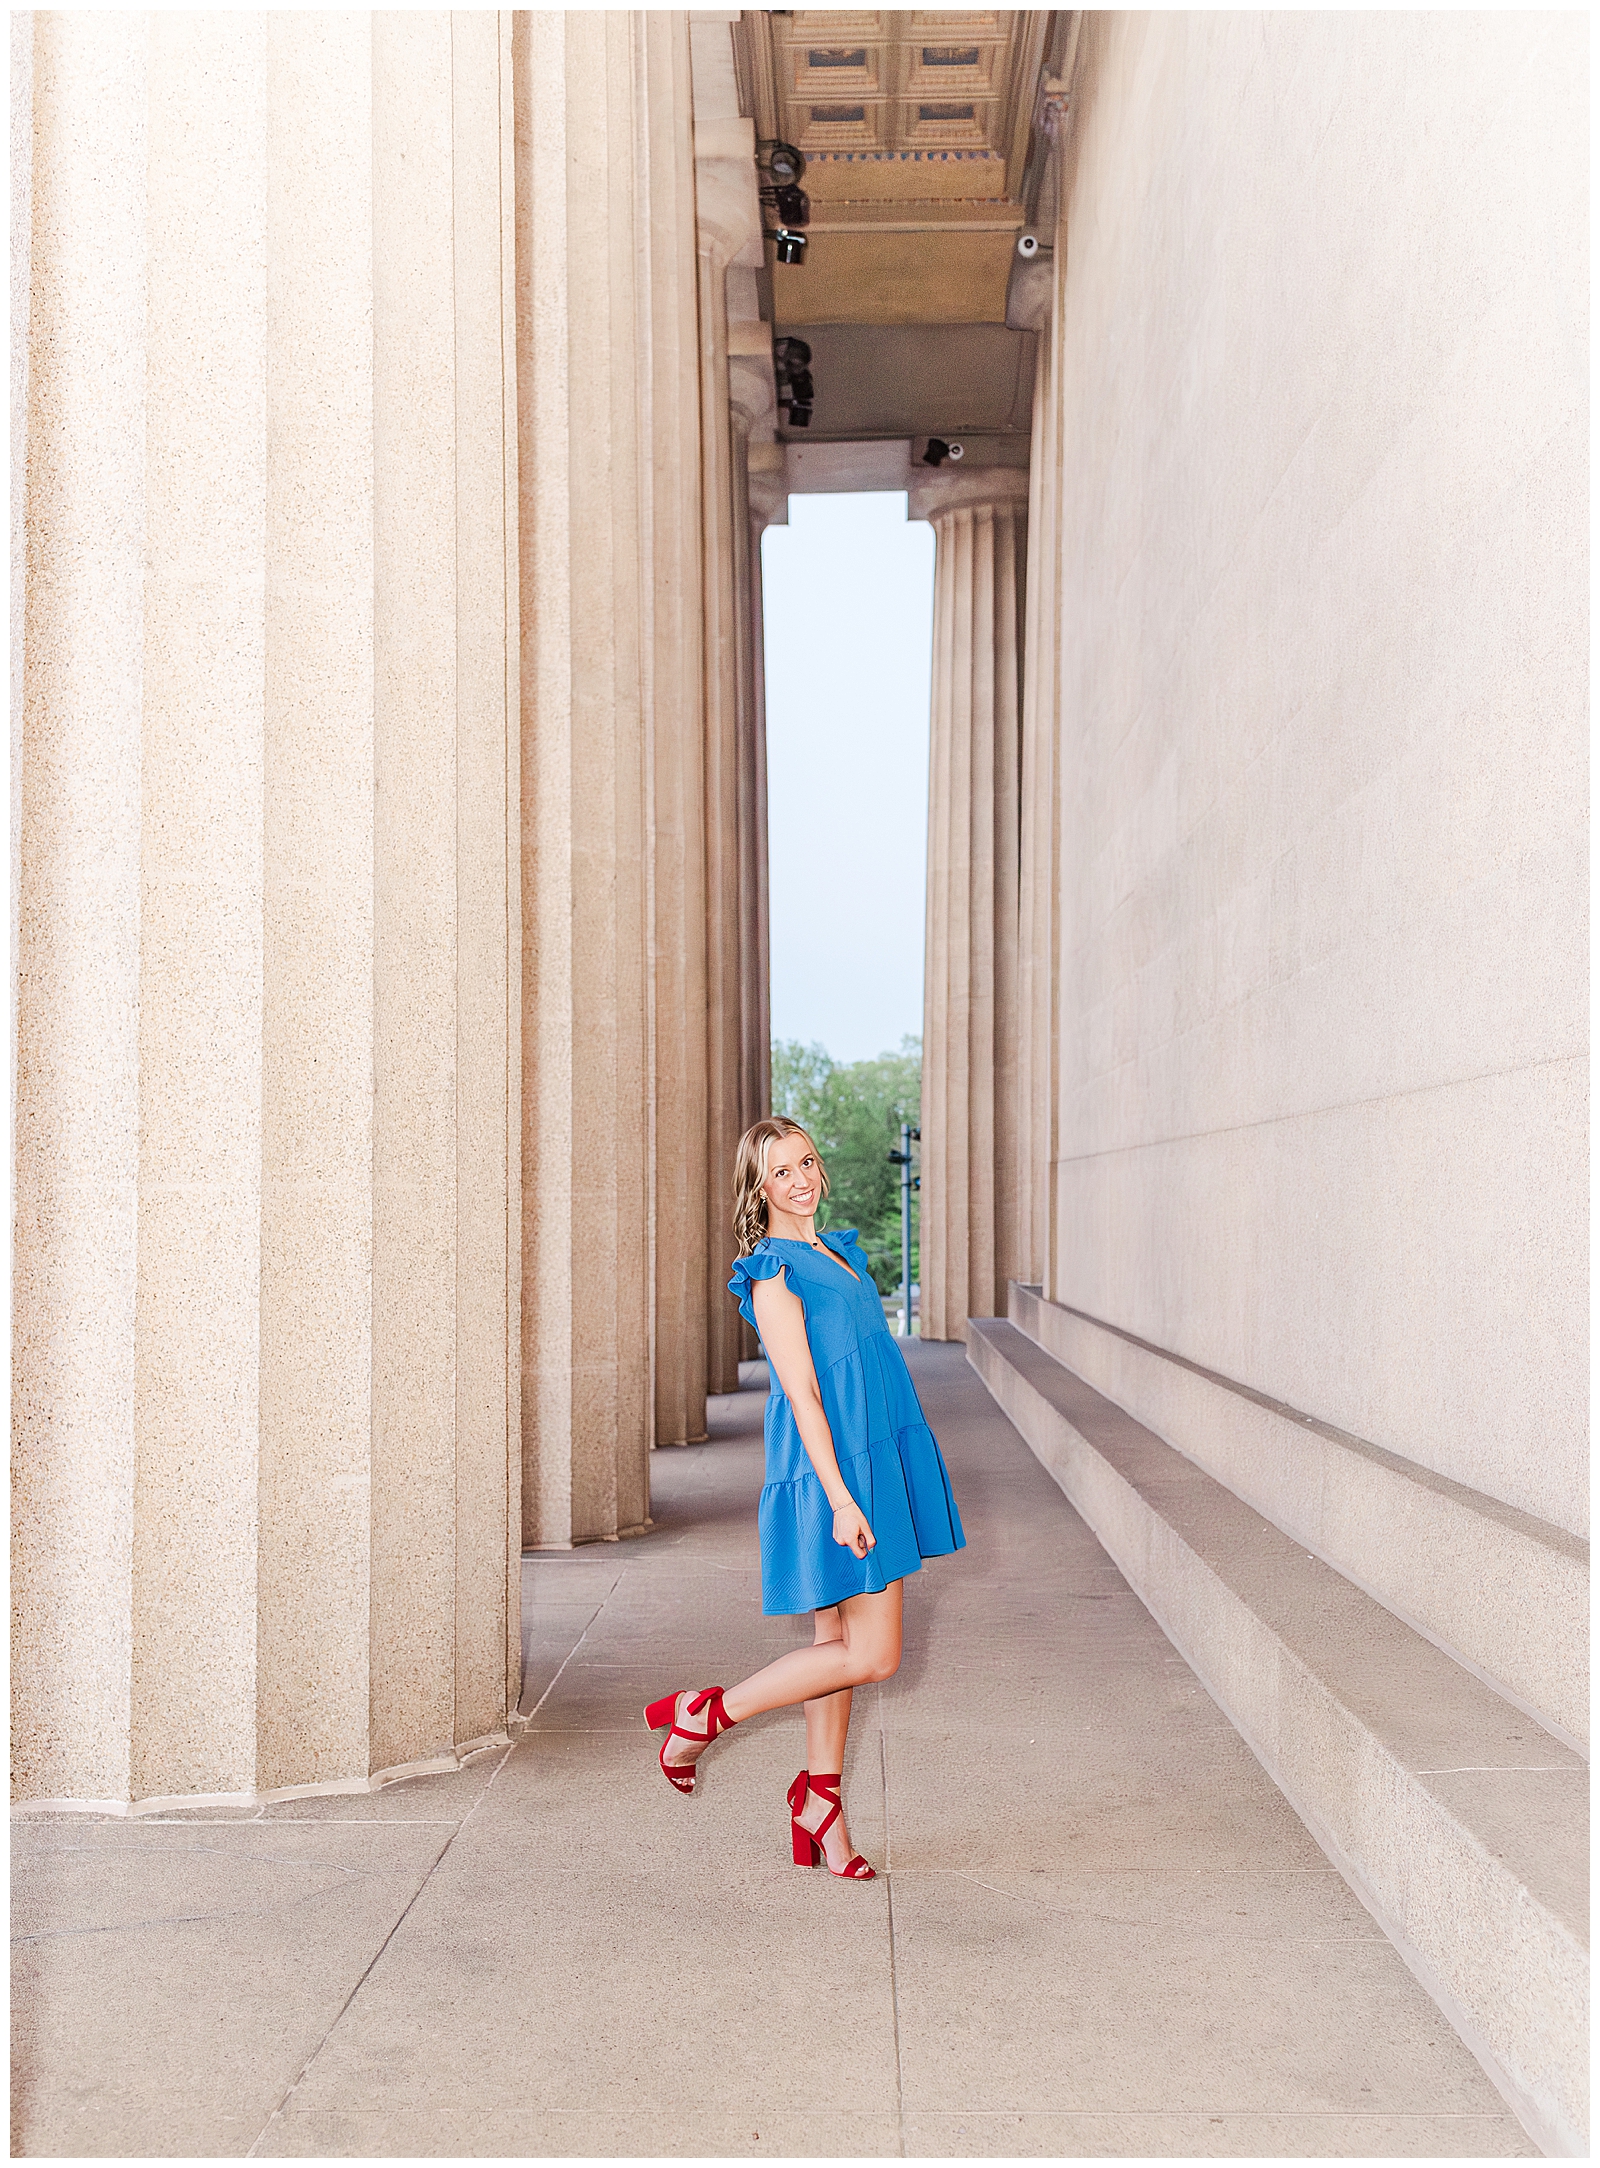 Senior girl in a blue dress and red heels, in front of columns at Centennial Park, Nashville, TN